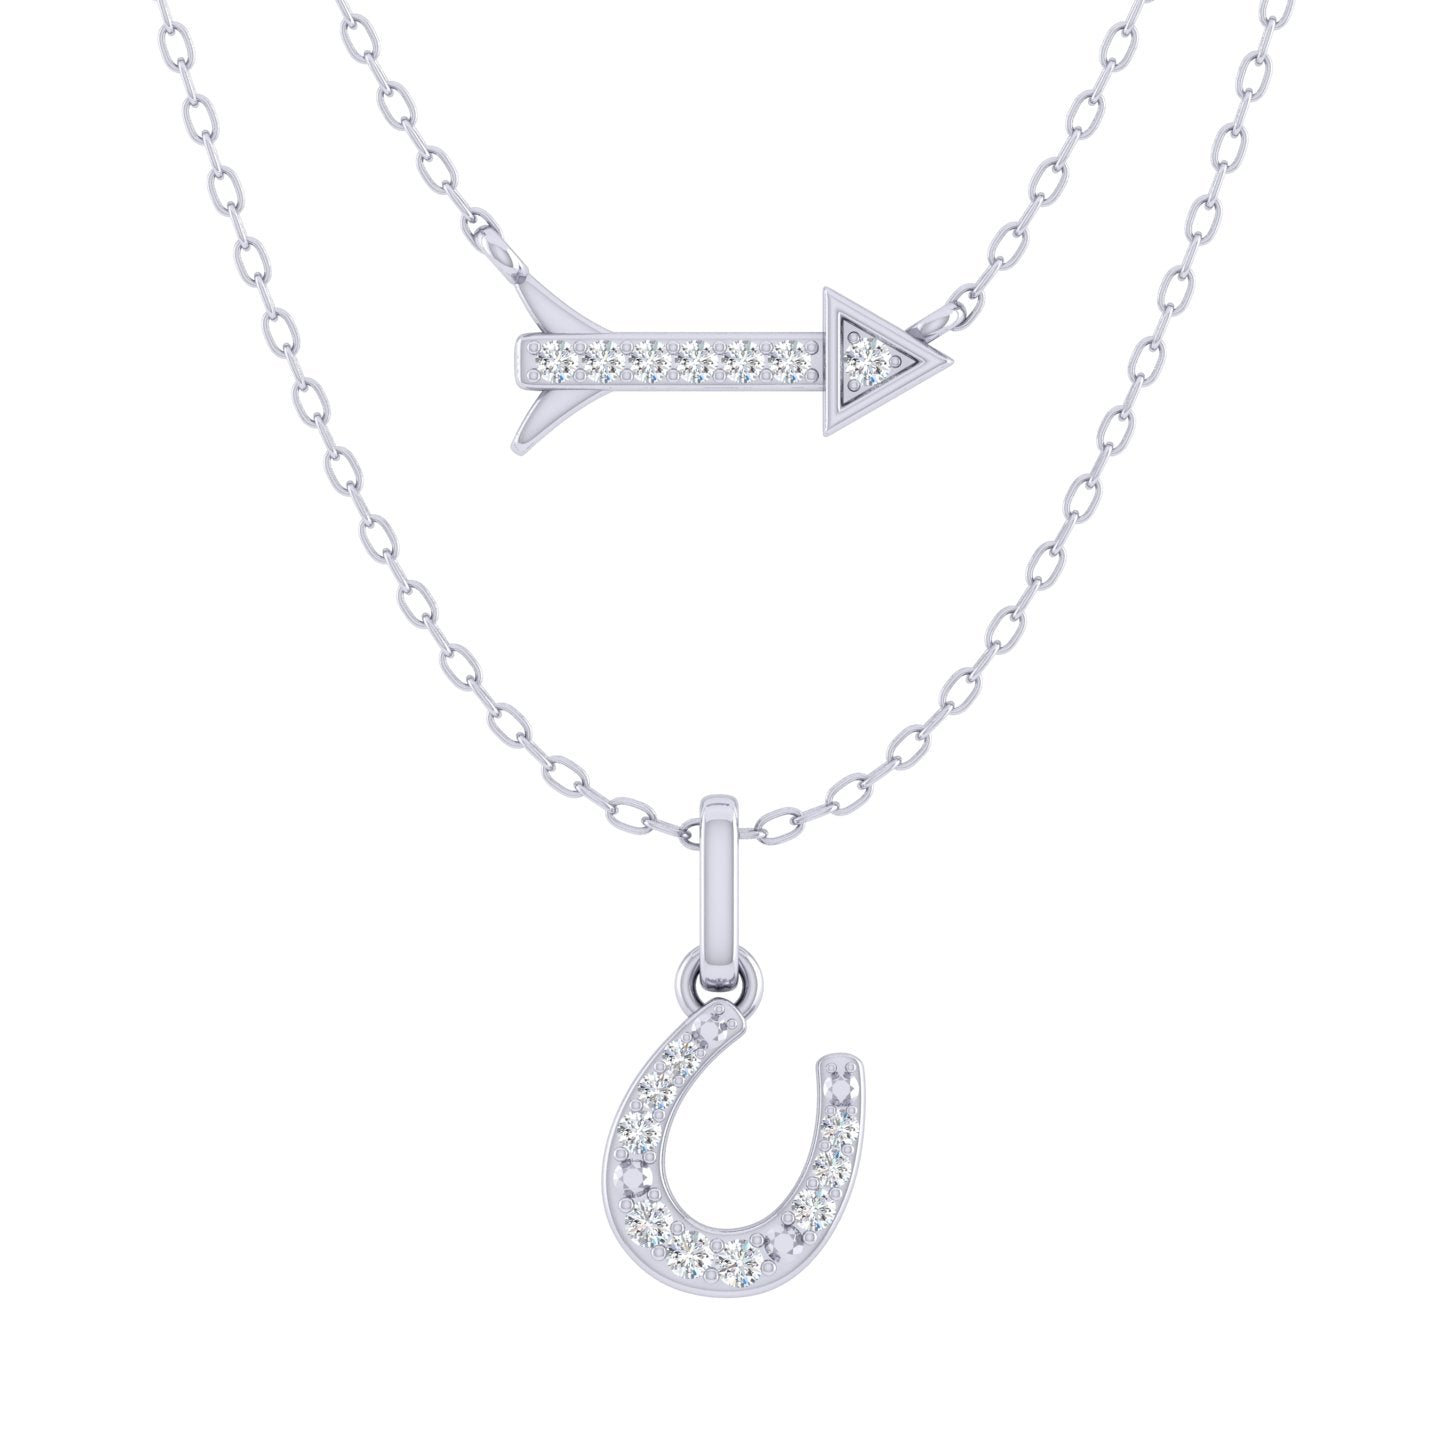 Horseshoe and Arrow Layered 1/10 Cttw Natural Diamond Pendant Necklace set in 925 Sterling Silver…